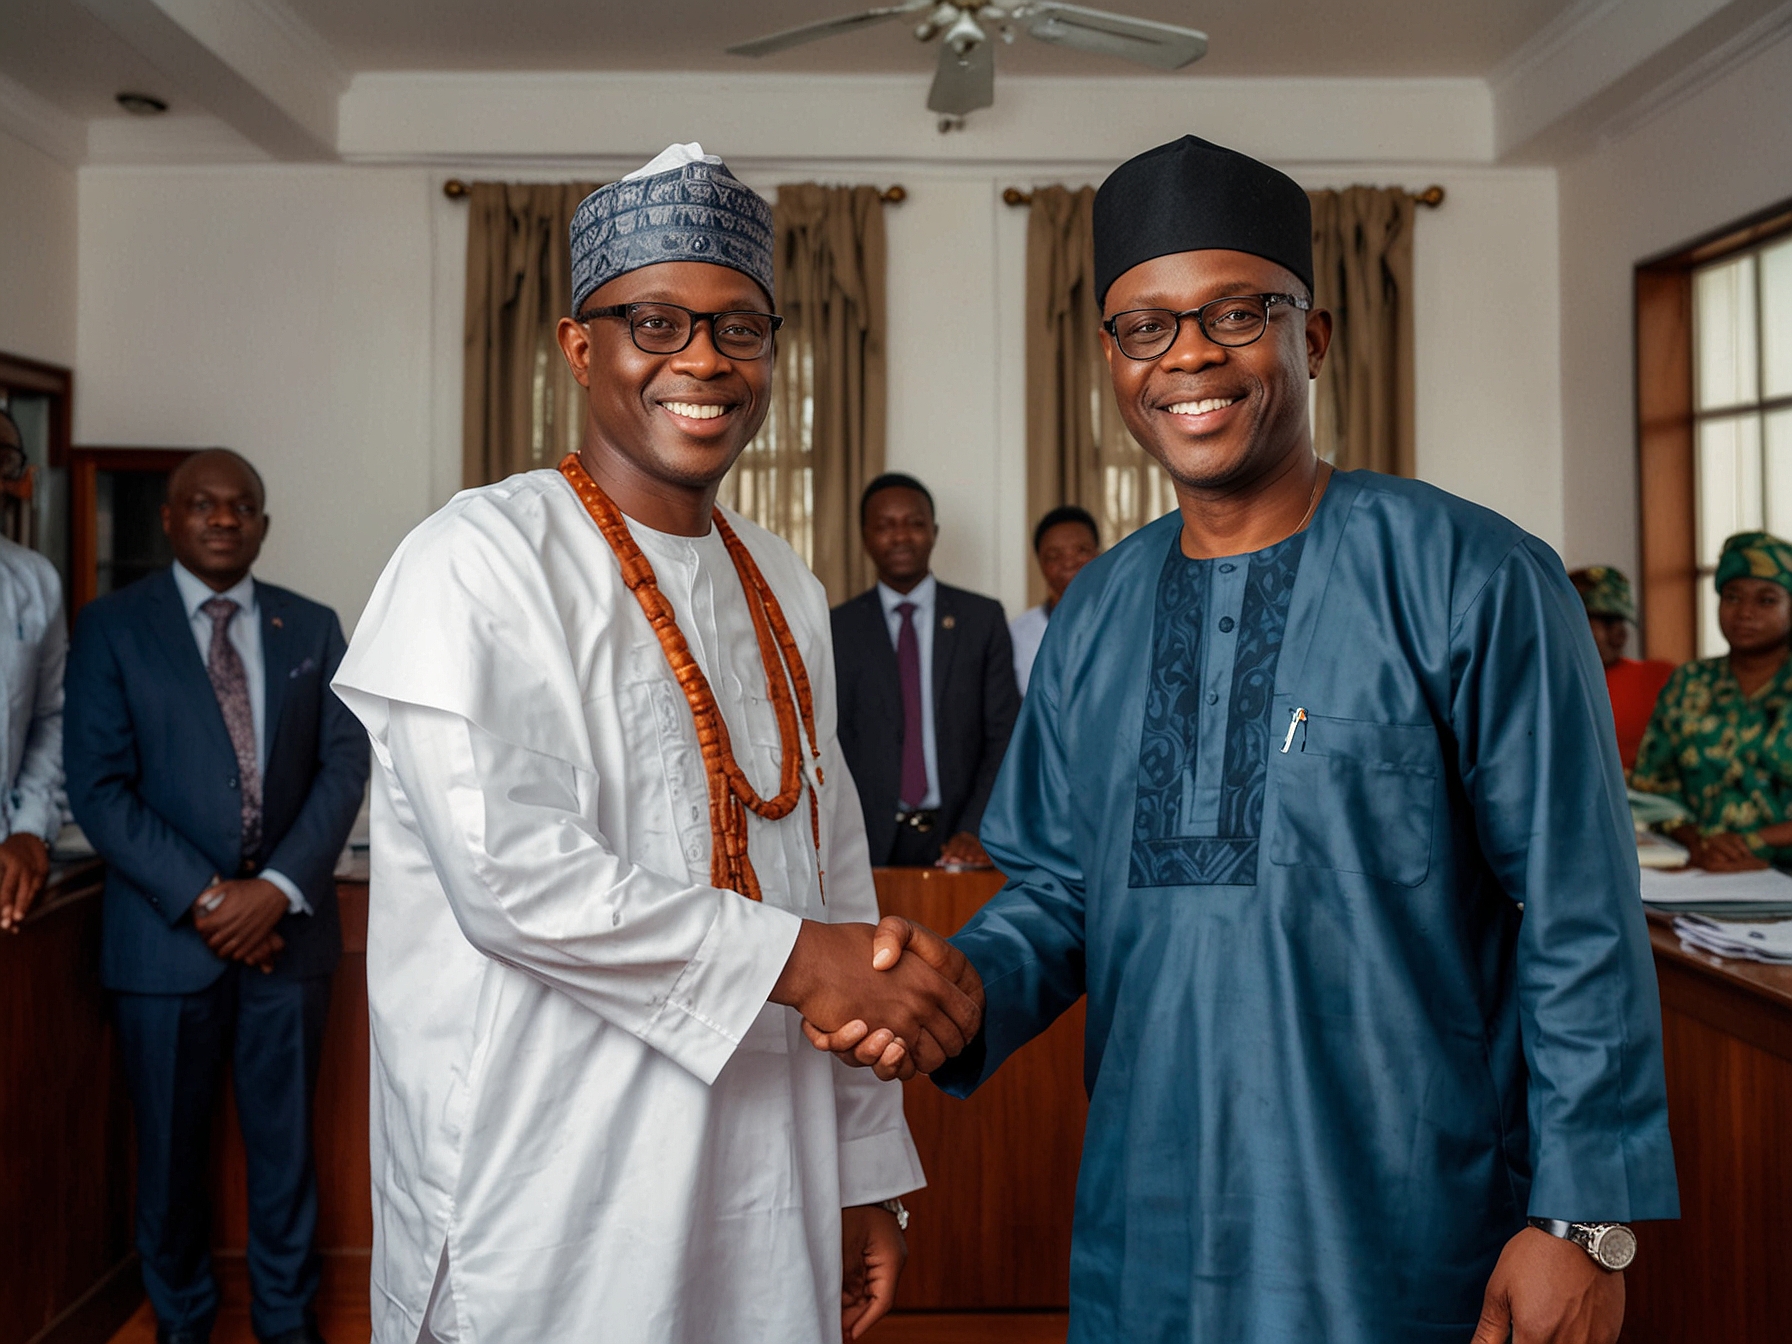 Olusola Oke shaking hands with Governor Lucky Aiyedatiwa, symbolizing his support and alliance ahead of the Ondo State gubernatorial election.